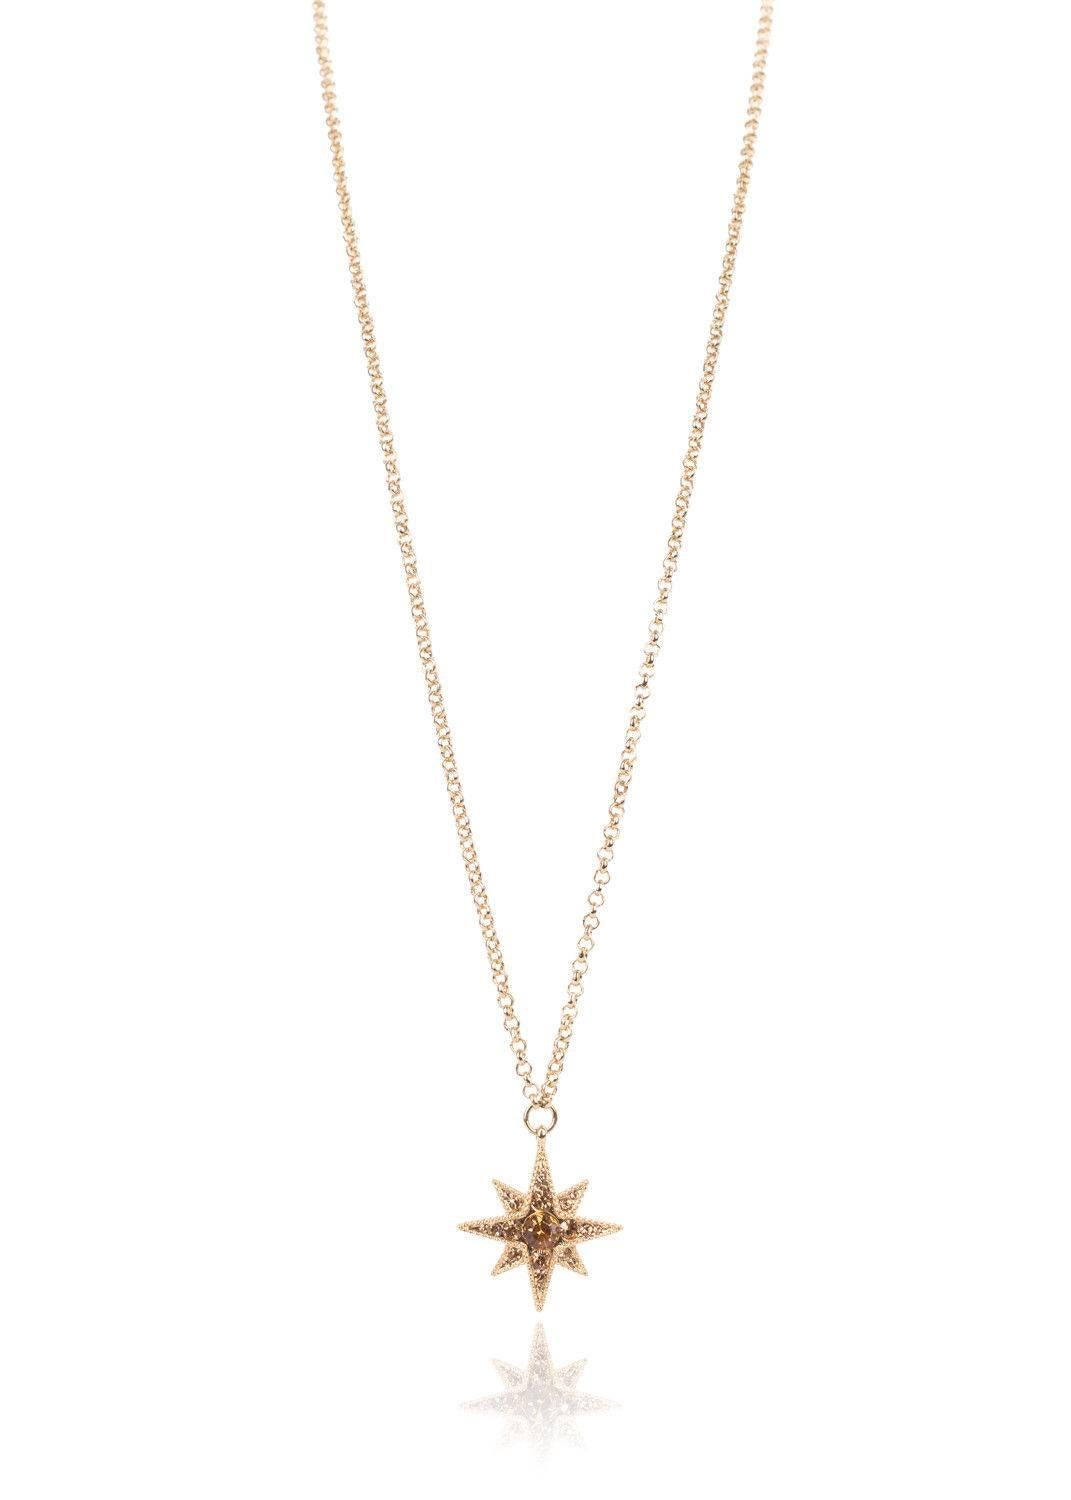 Get your Roberto Cavalli Necklace for the ultimate win. This necklace features a thin gold chain, small star pendant, and embedded swarovski crystal. You can pair this necklace with a deep v neck dress and go. 

10.5 inch Length
1 inch Pendant
Gold